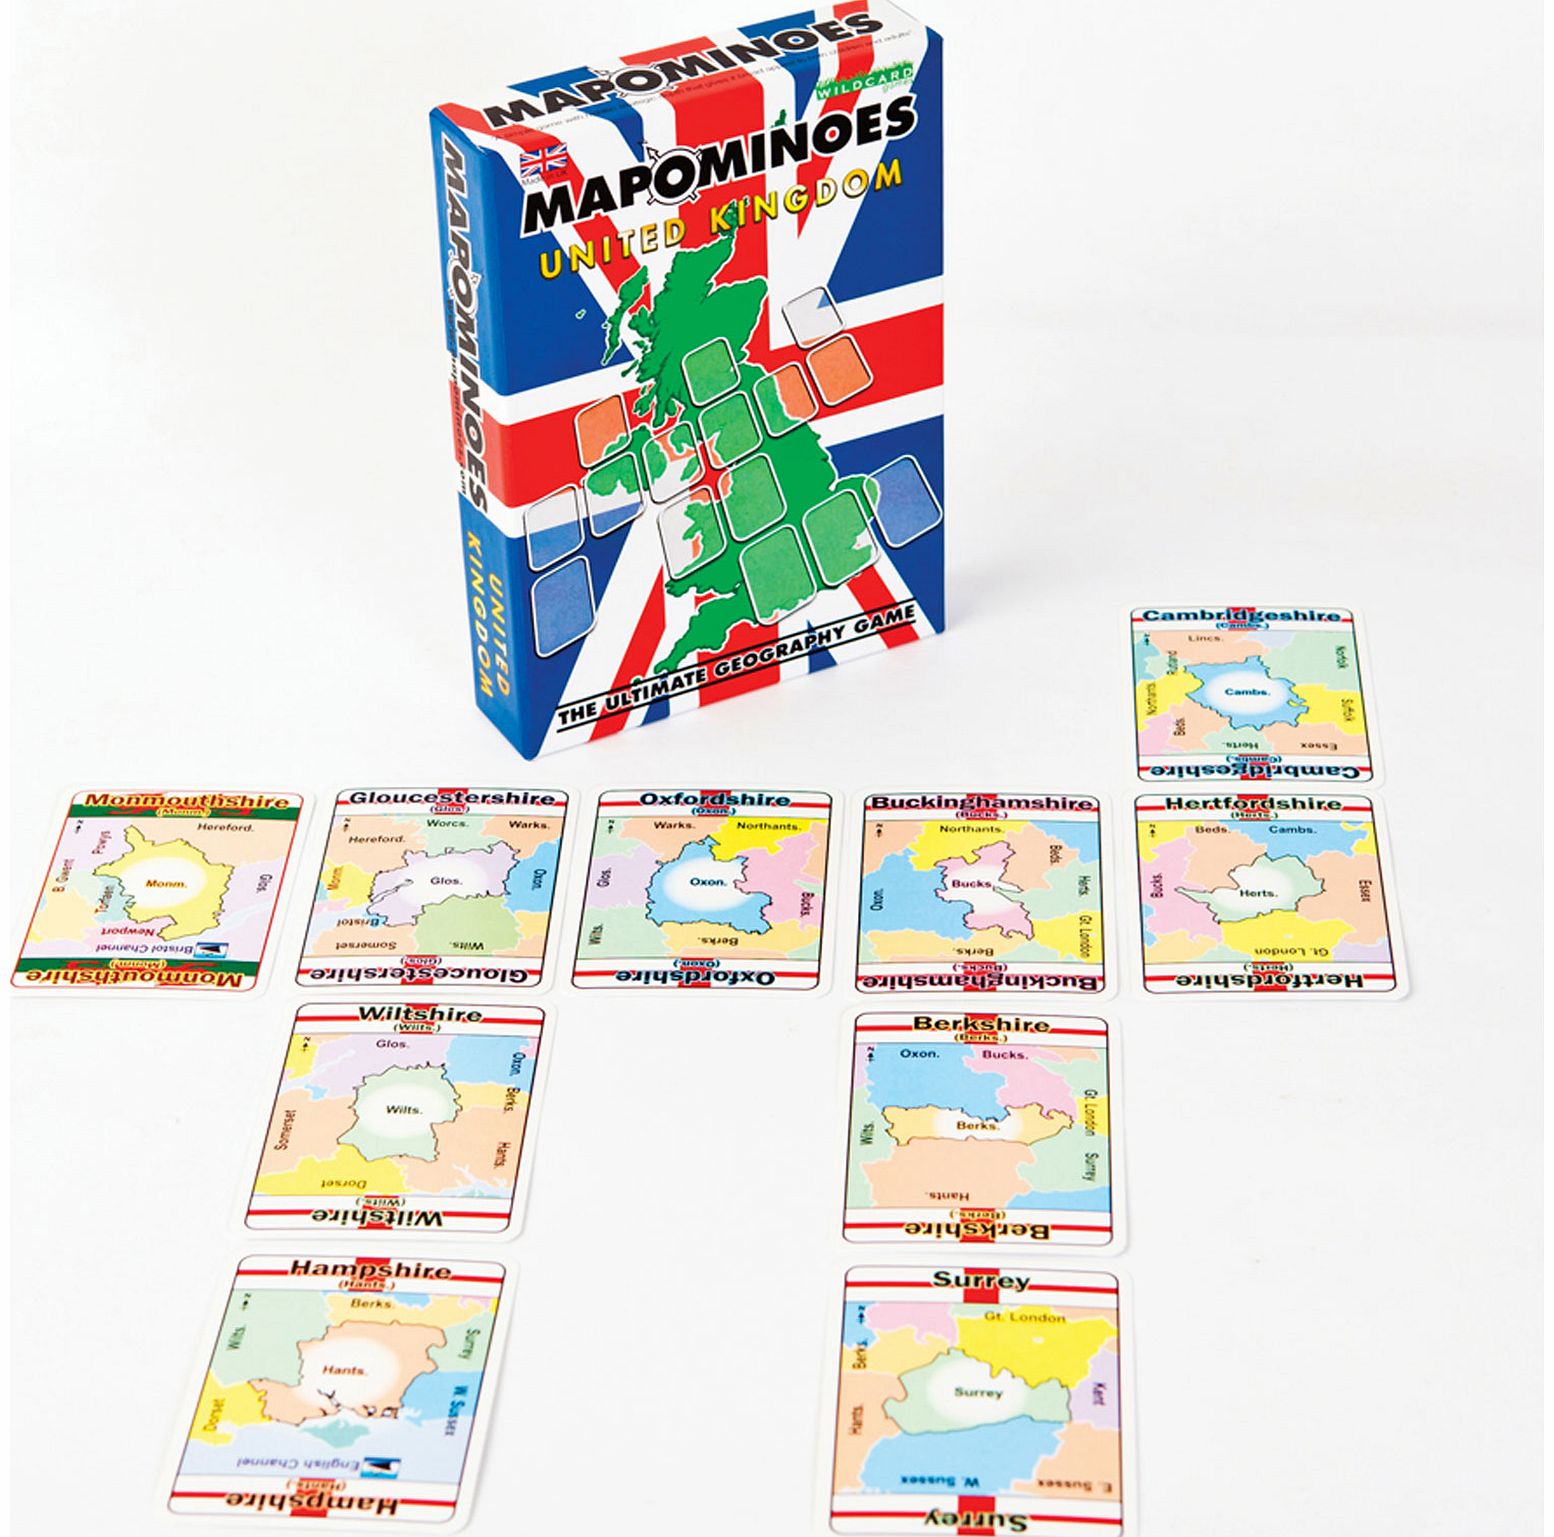 Wild Card Games MAPOMINOES United Kingdom - The Ultimate